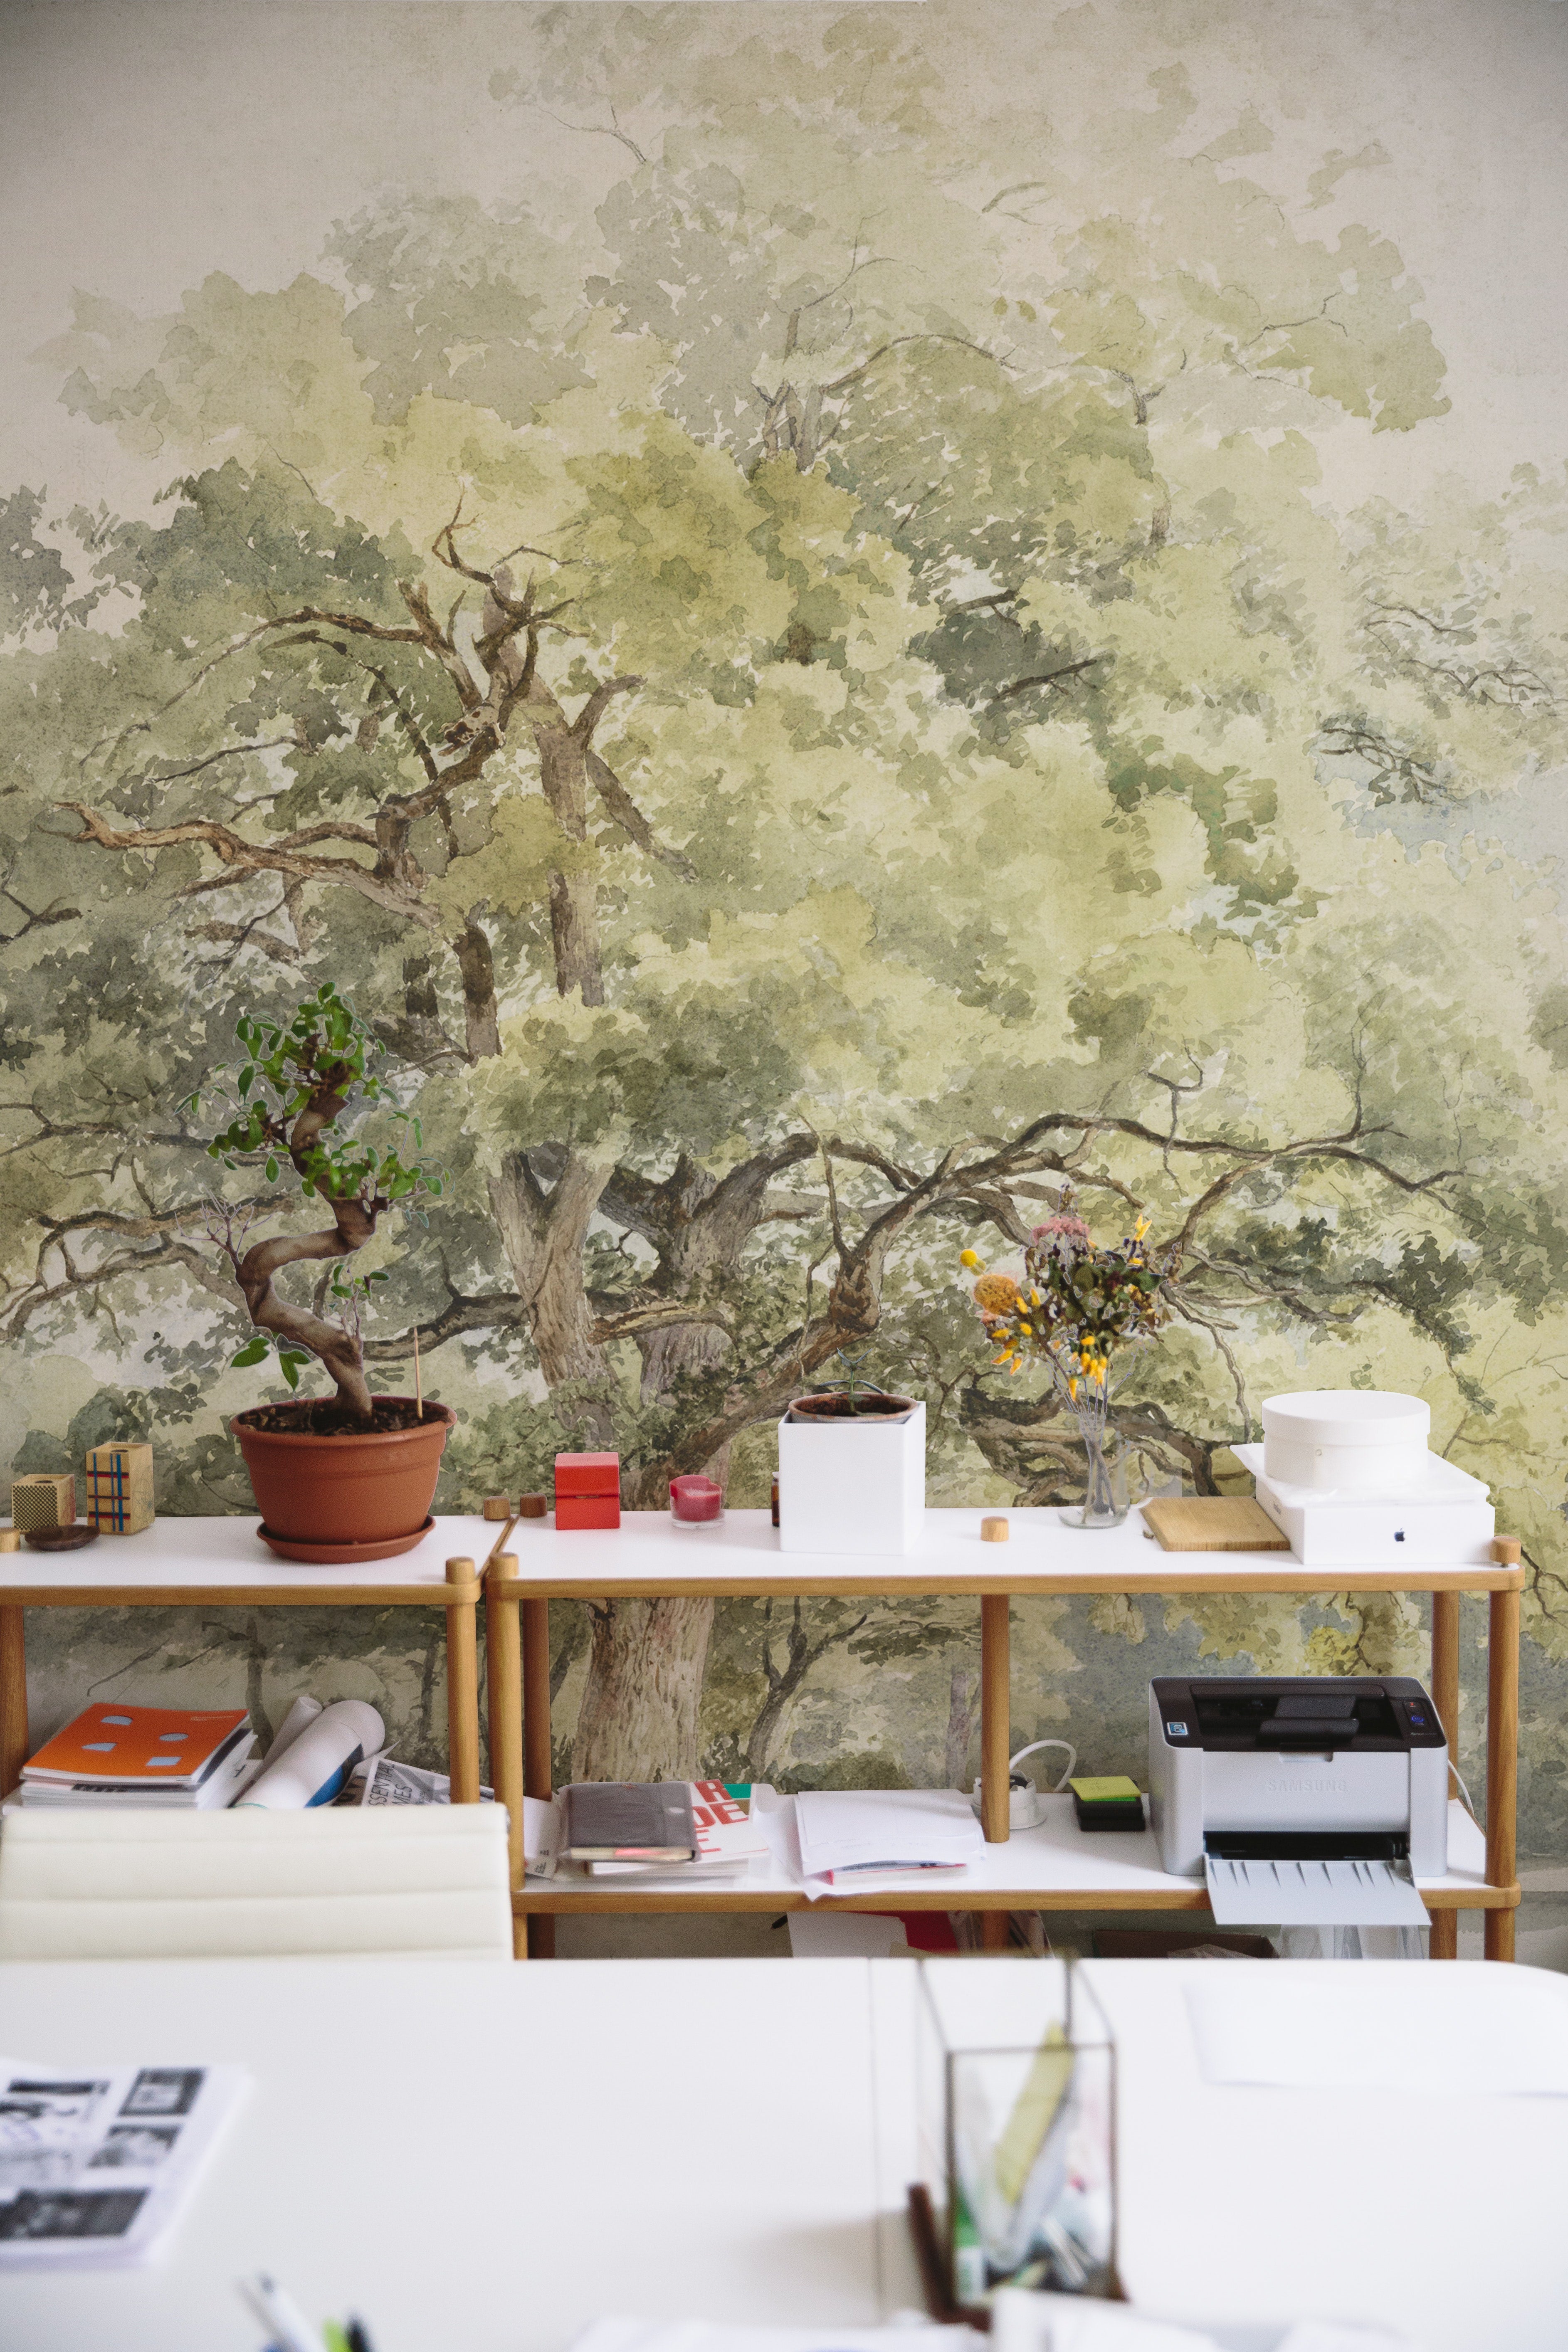 An office space where the Boomstudie Vintage Wall Mural creates a peaceful work environment. The mural, illustrating a dense tree with intricate branches and leaves, spans the entire wall, pairing beautifully with simple office furniture and decorative items to inspire creativity.